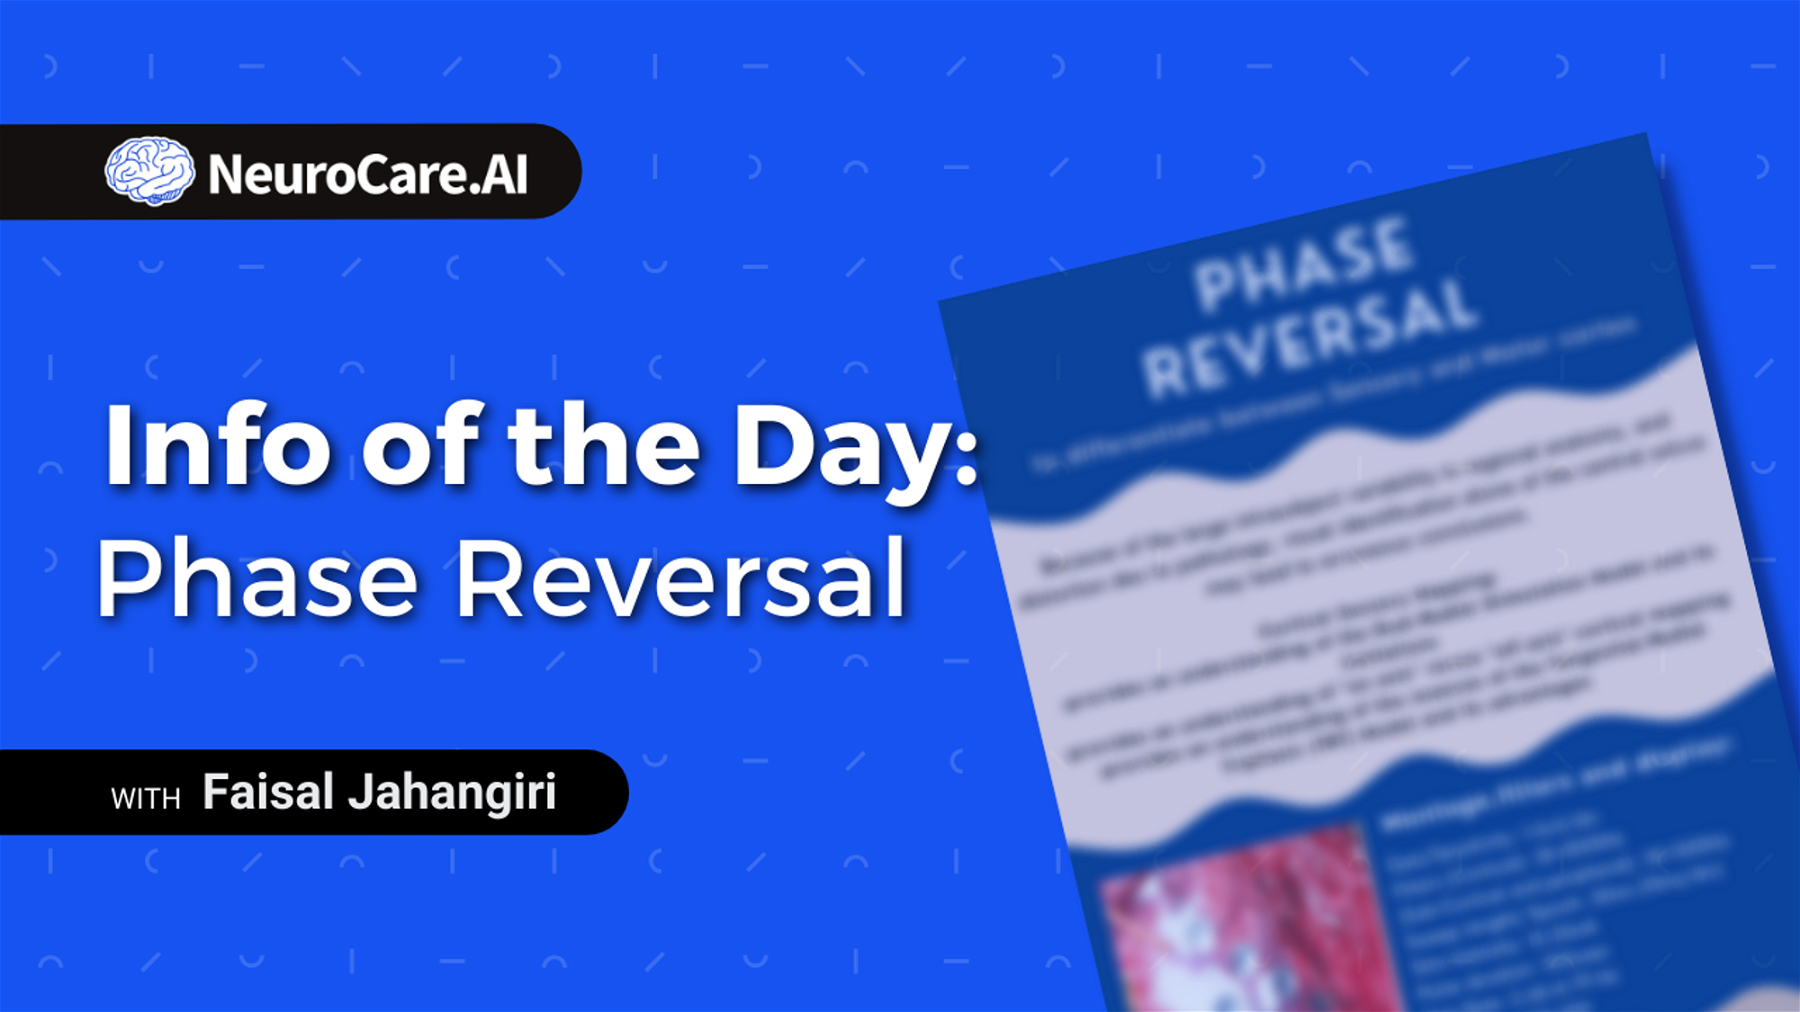 Info of the Day: "Phase Reversal"